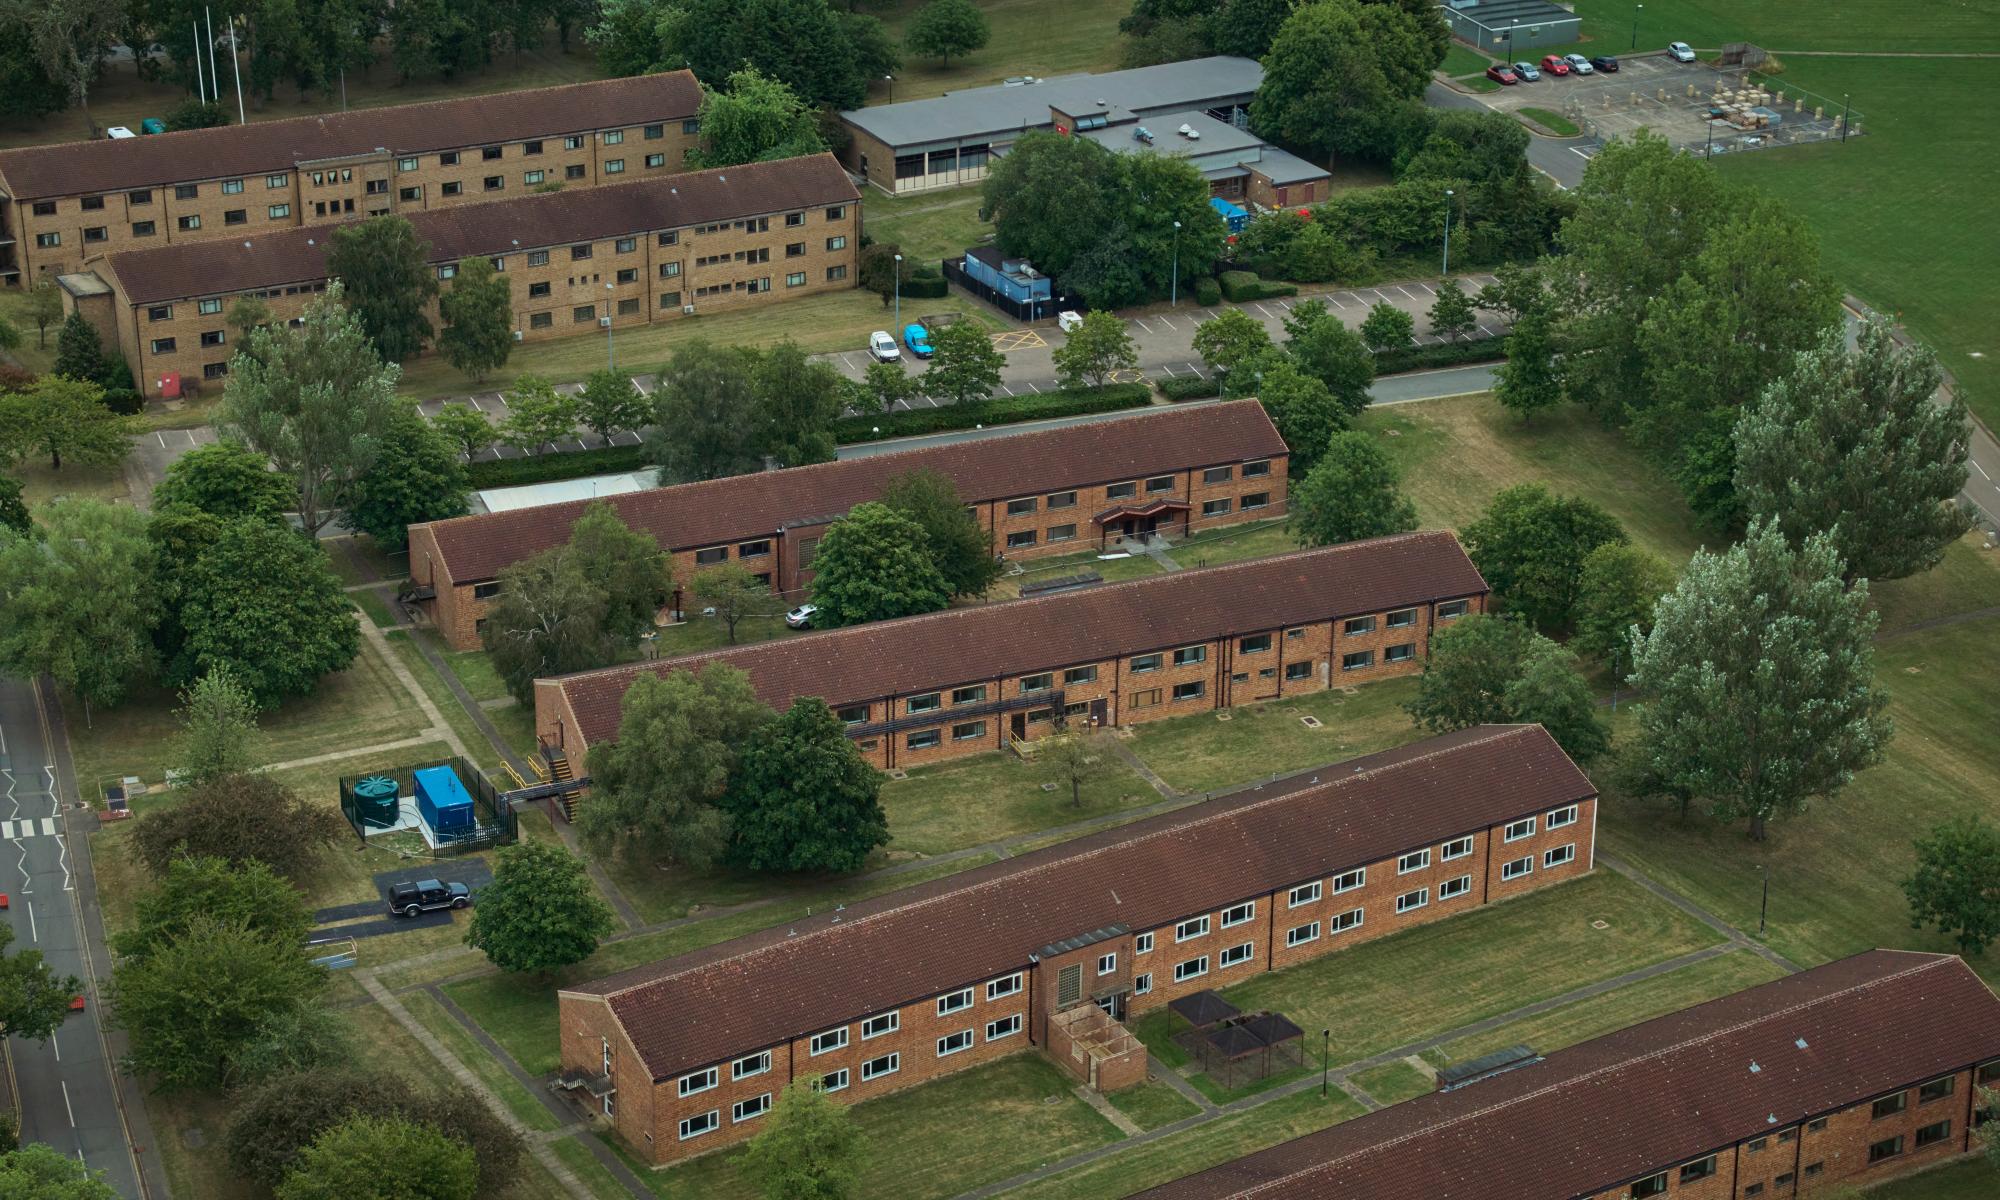 asylum seekers moved out of ex-raf site in essex after safety risks found